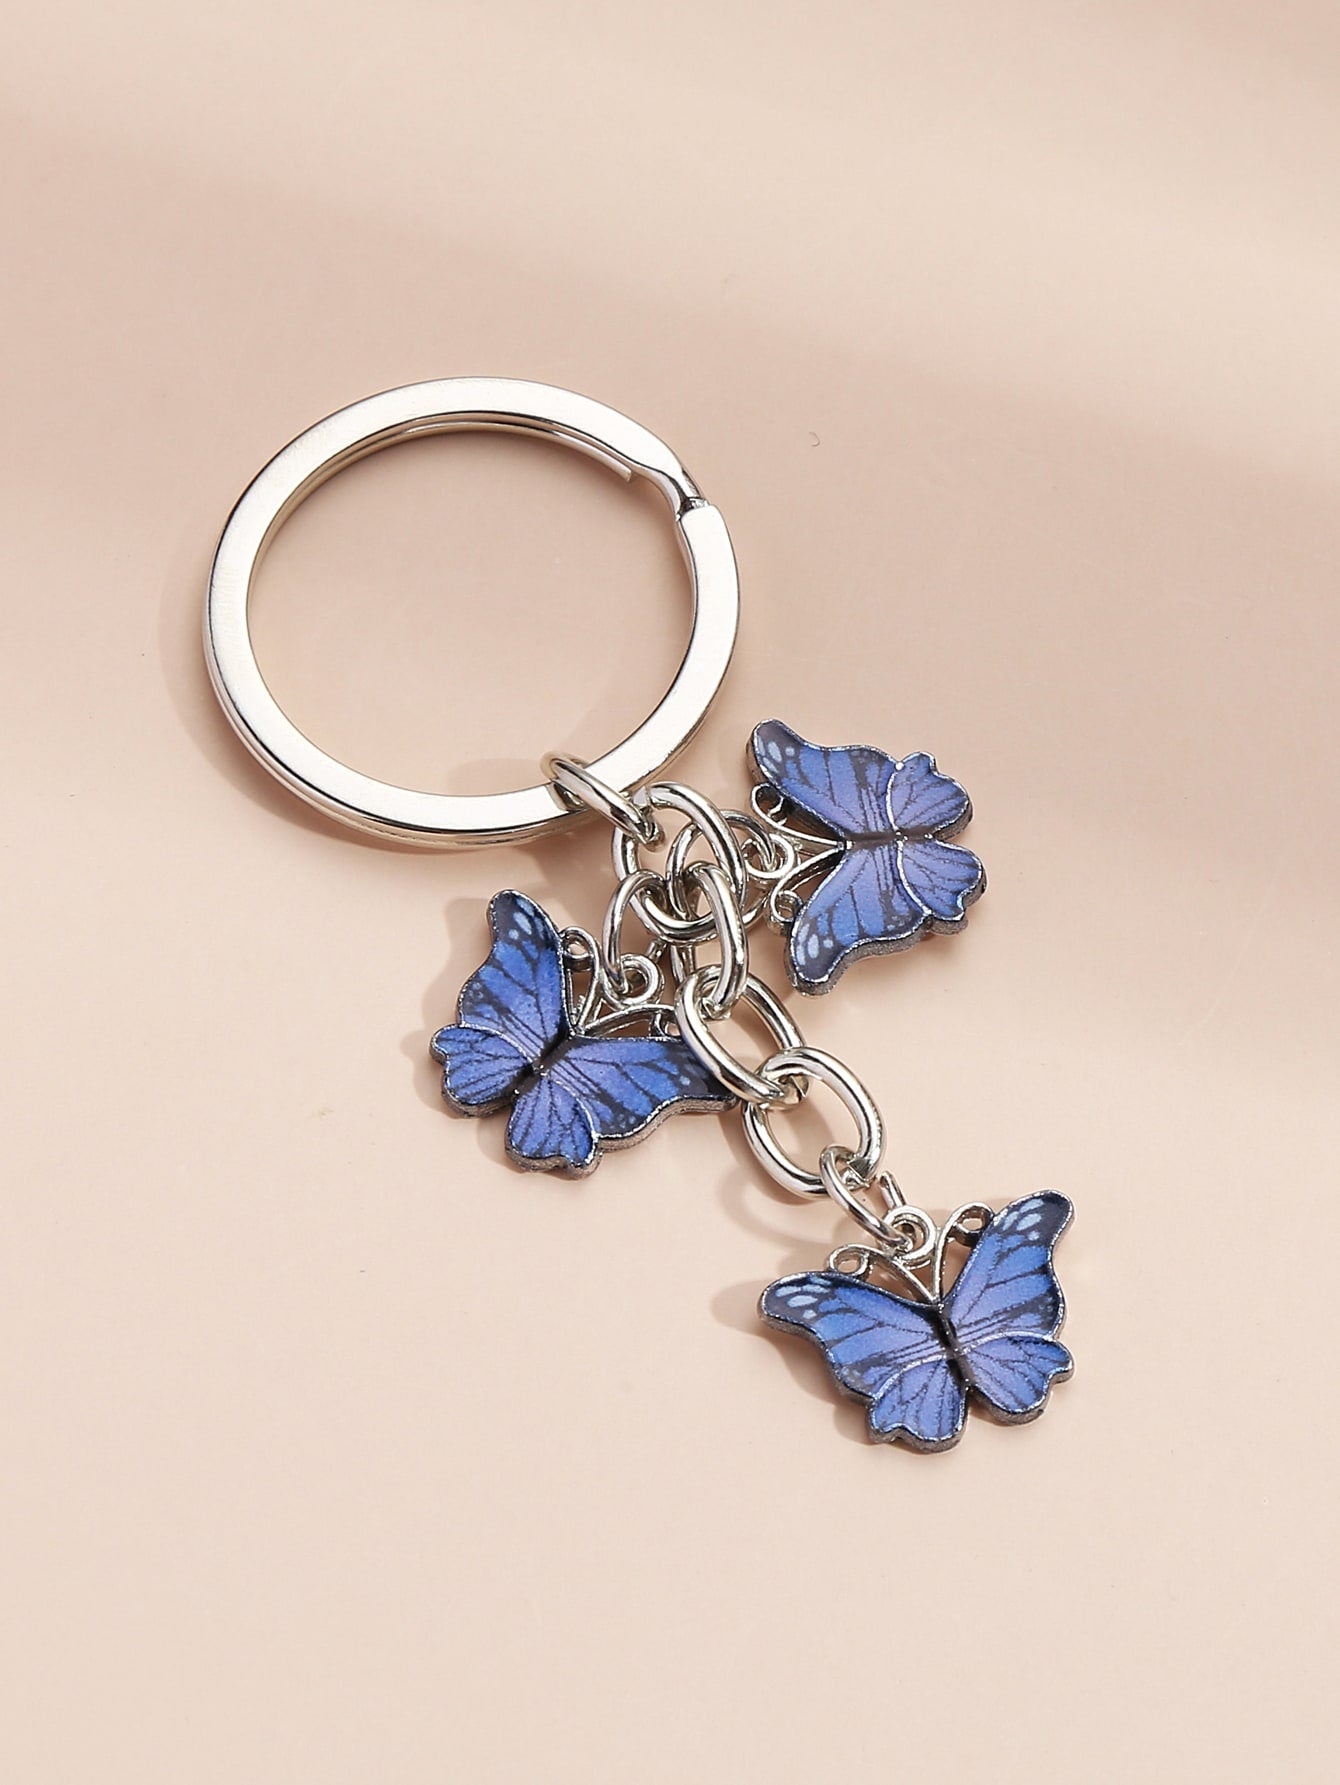 New Blue Butterfly Charm Keychain Accessories Pendant Bag Charm 